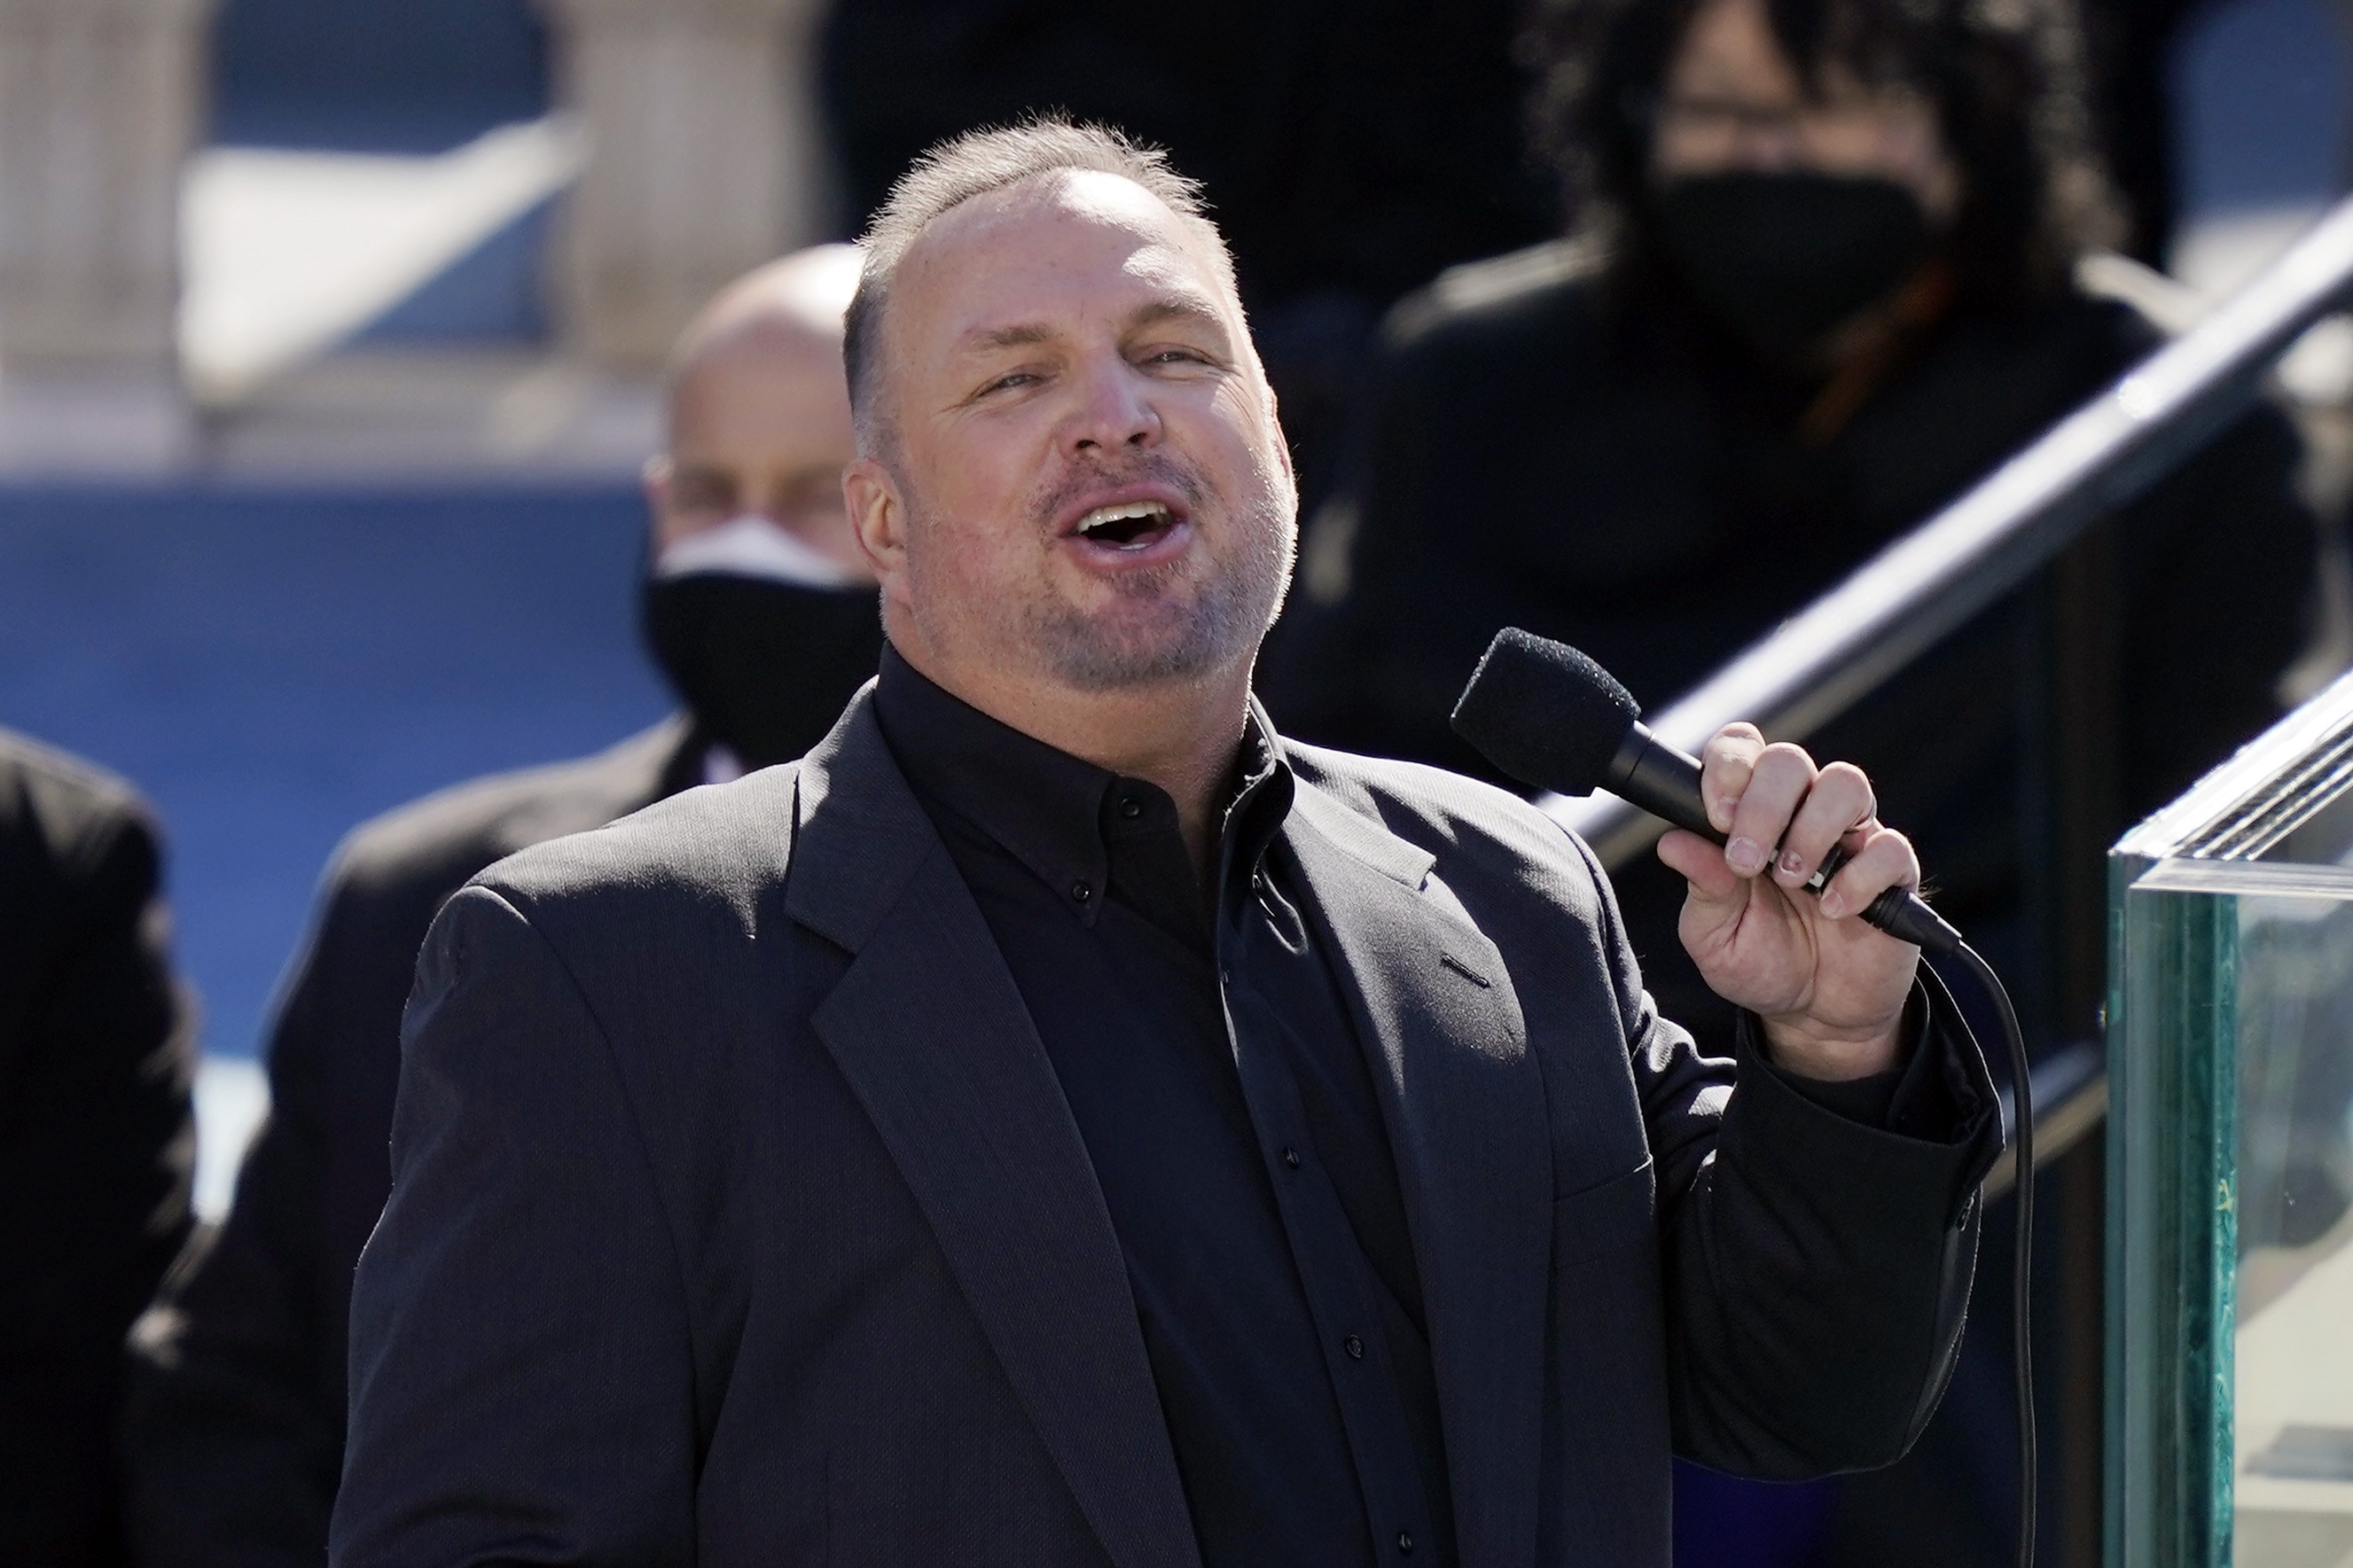 Joe Biden inauguration: Country singer Garth Brooks unites with moving rendition of Amazing Grace